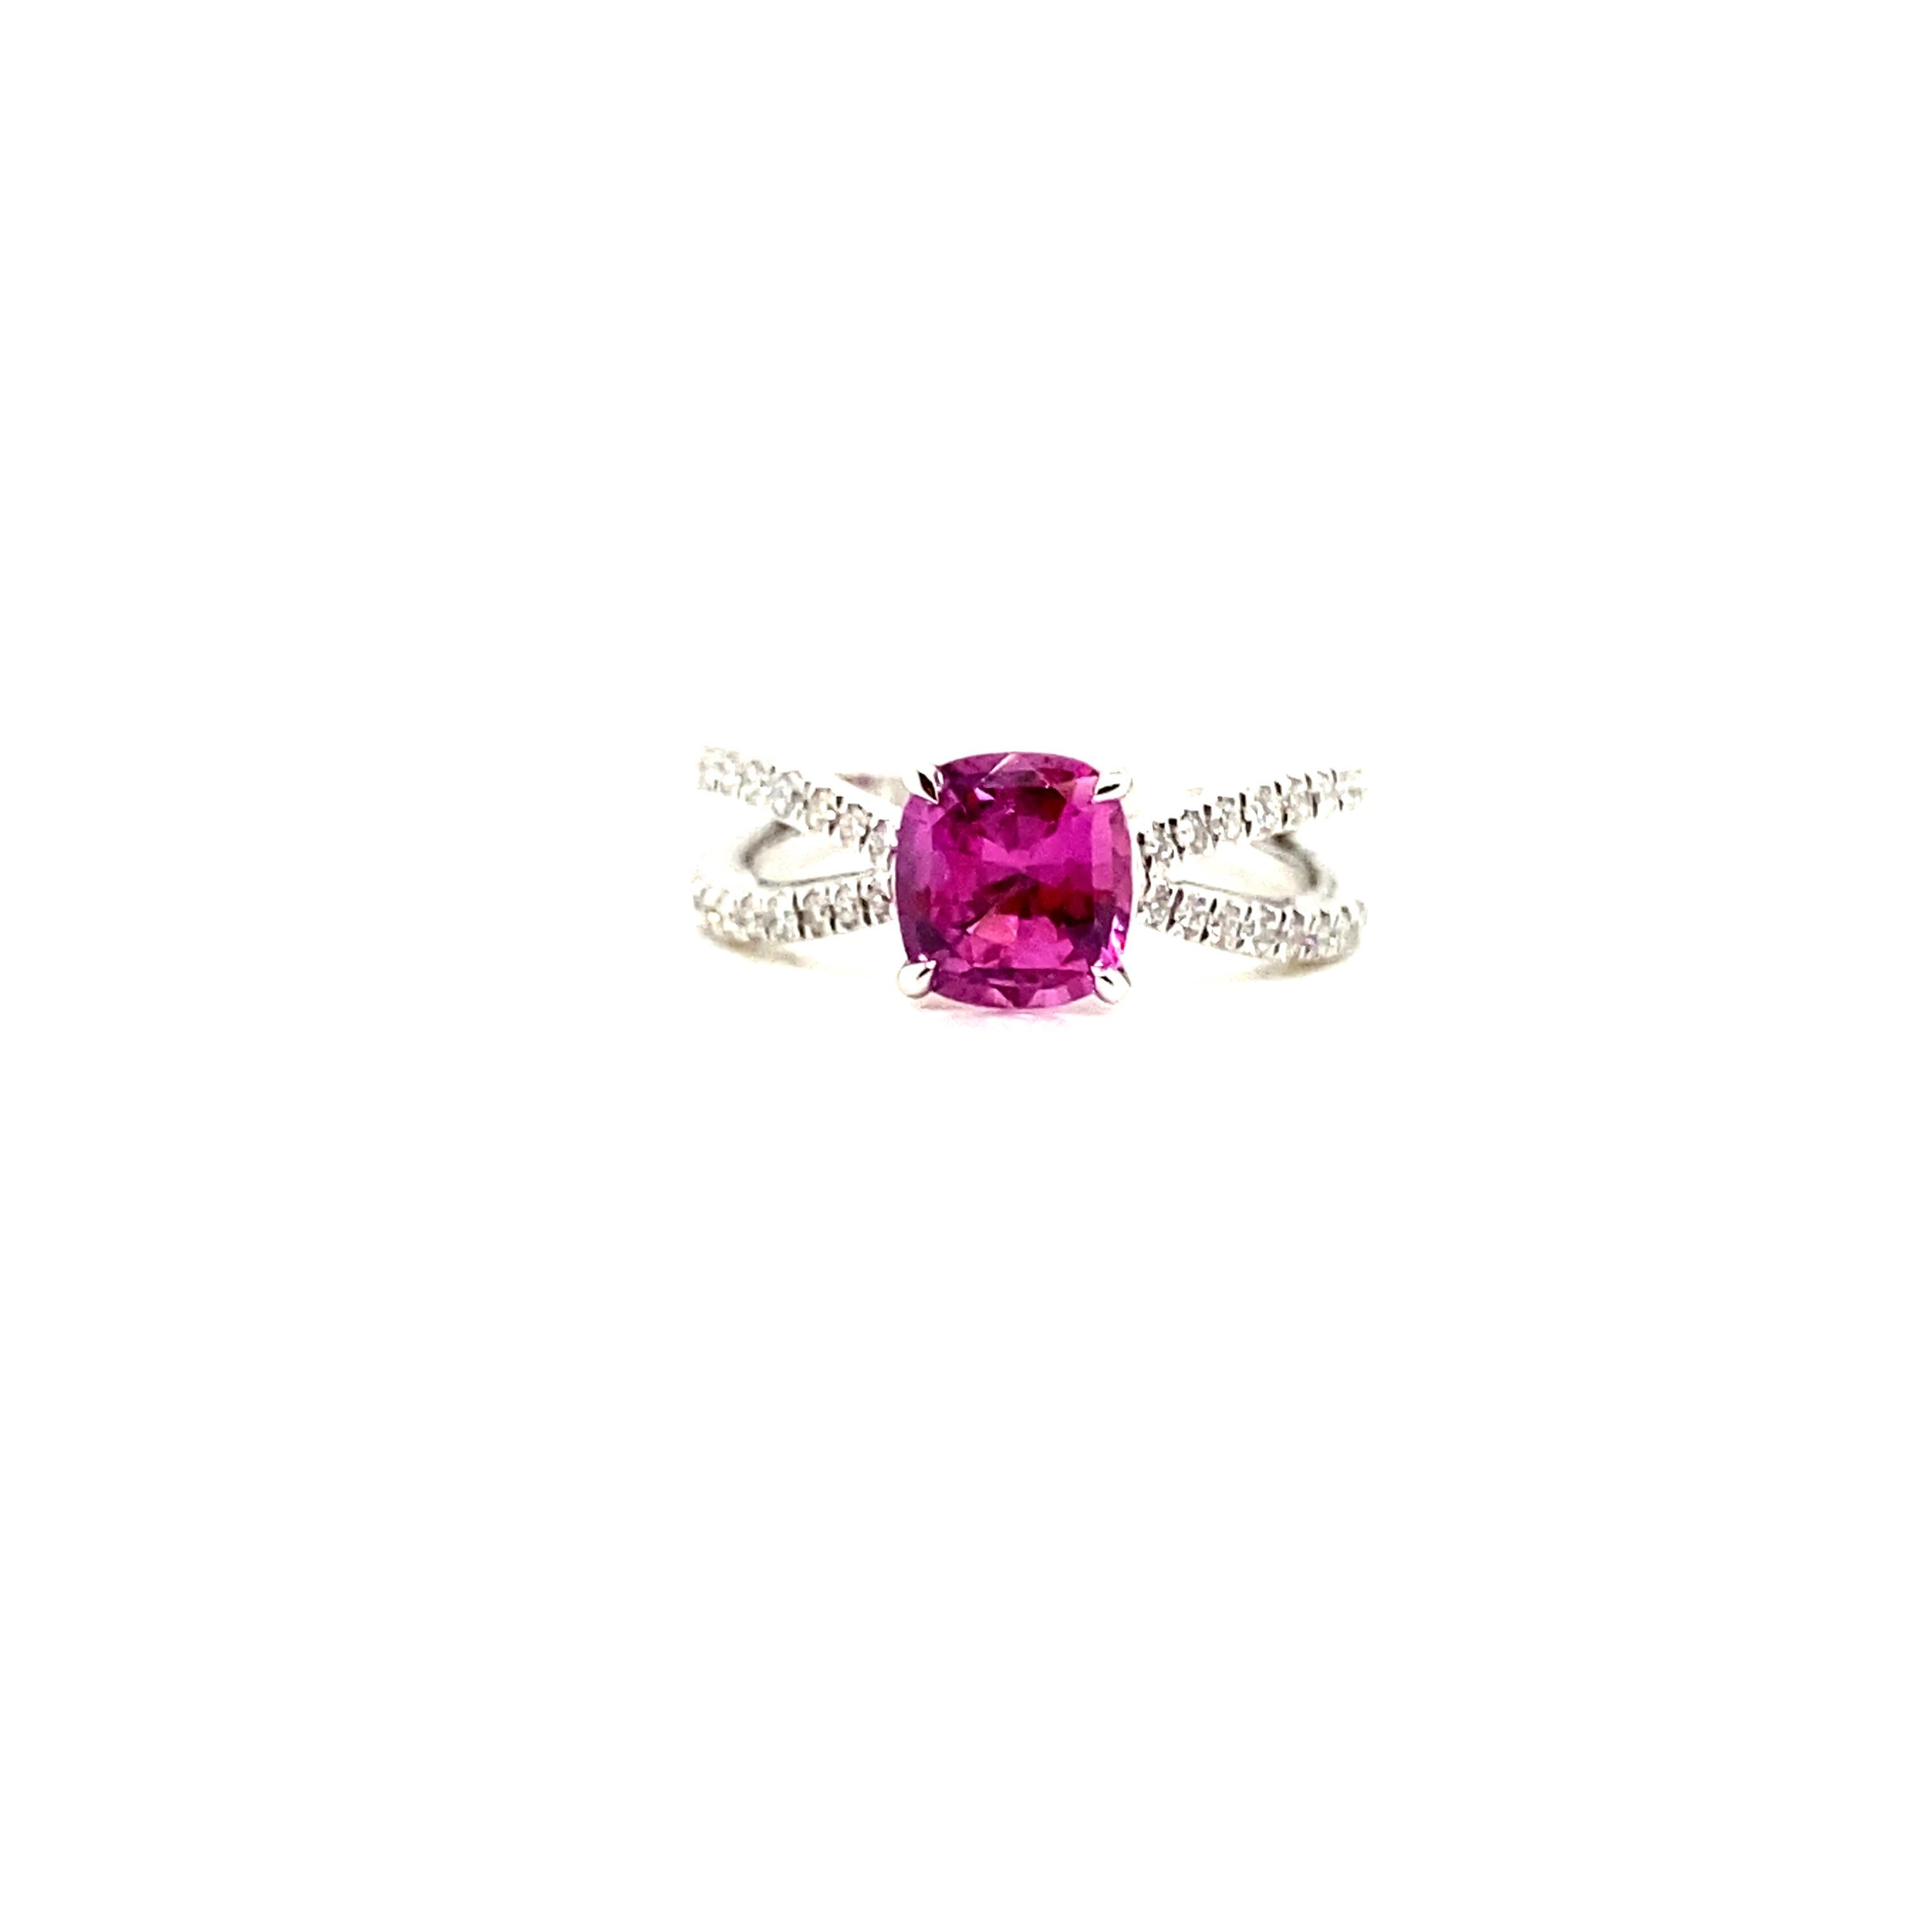 Contemporary 1.85 Carat GRS Certified Ceylon Vivid Pink Sapphire and Diamond Engagement Ring For Sale